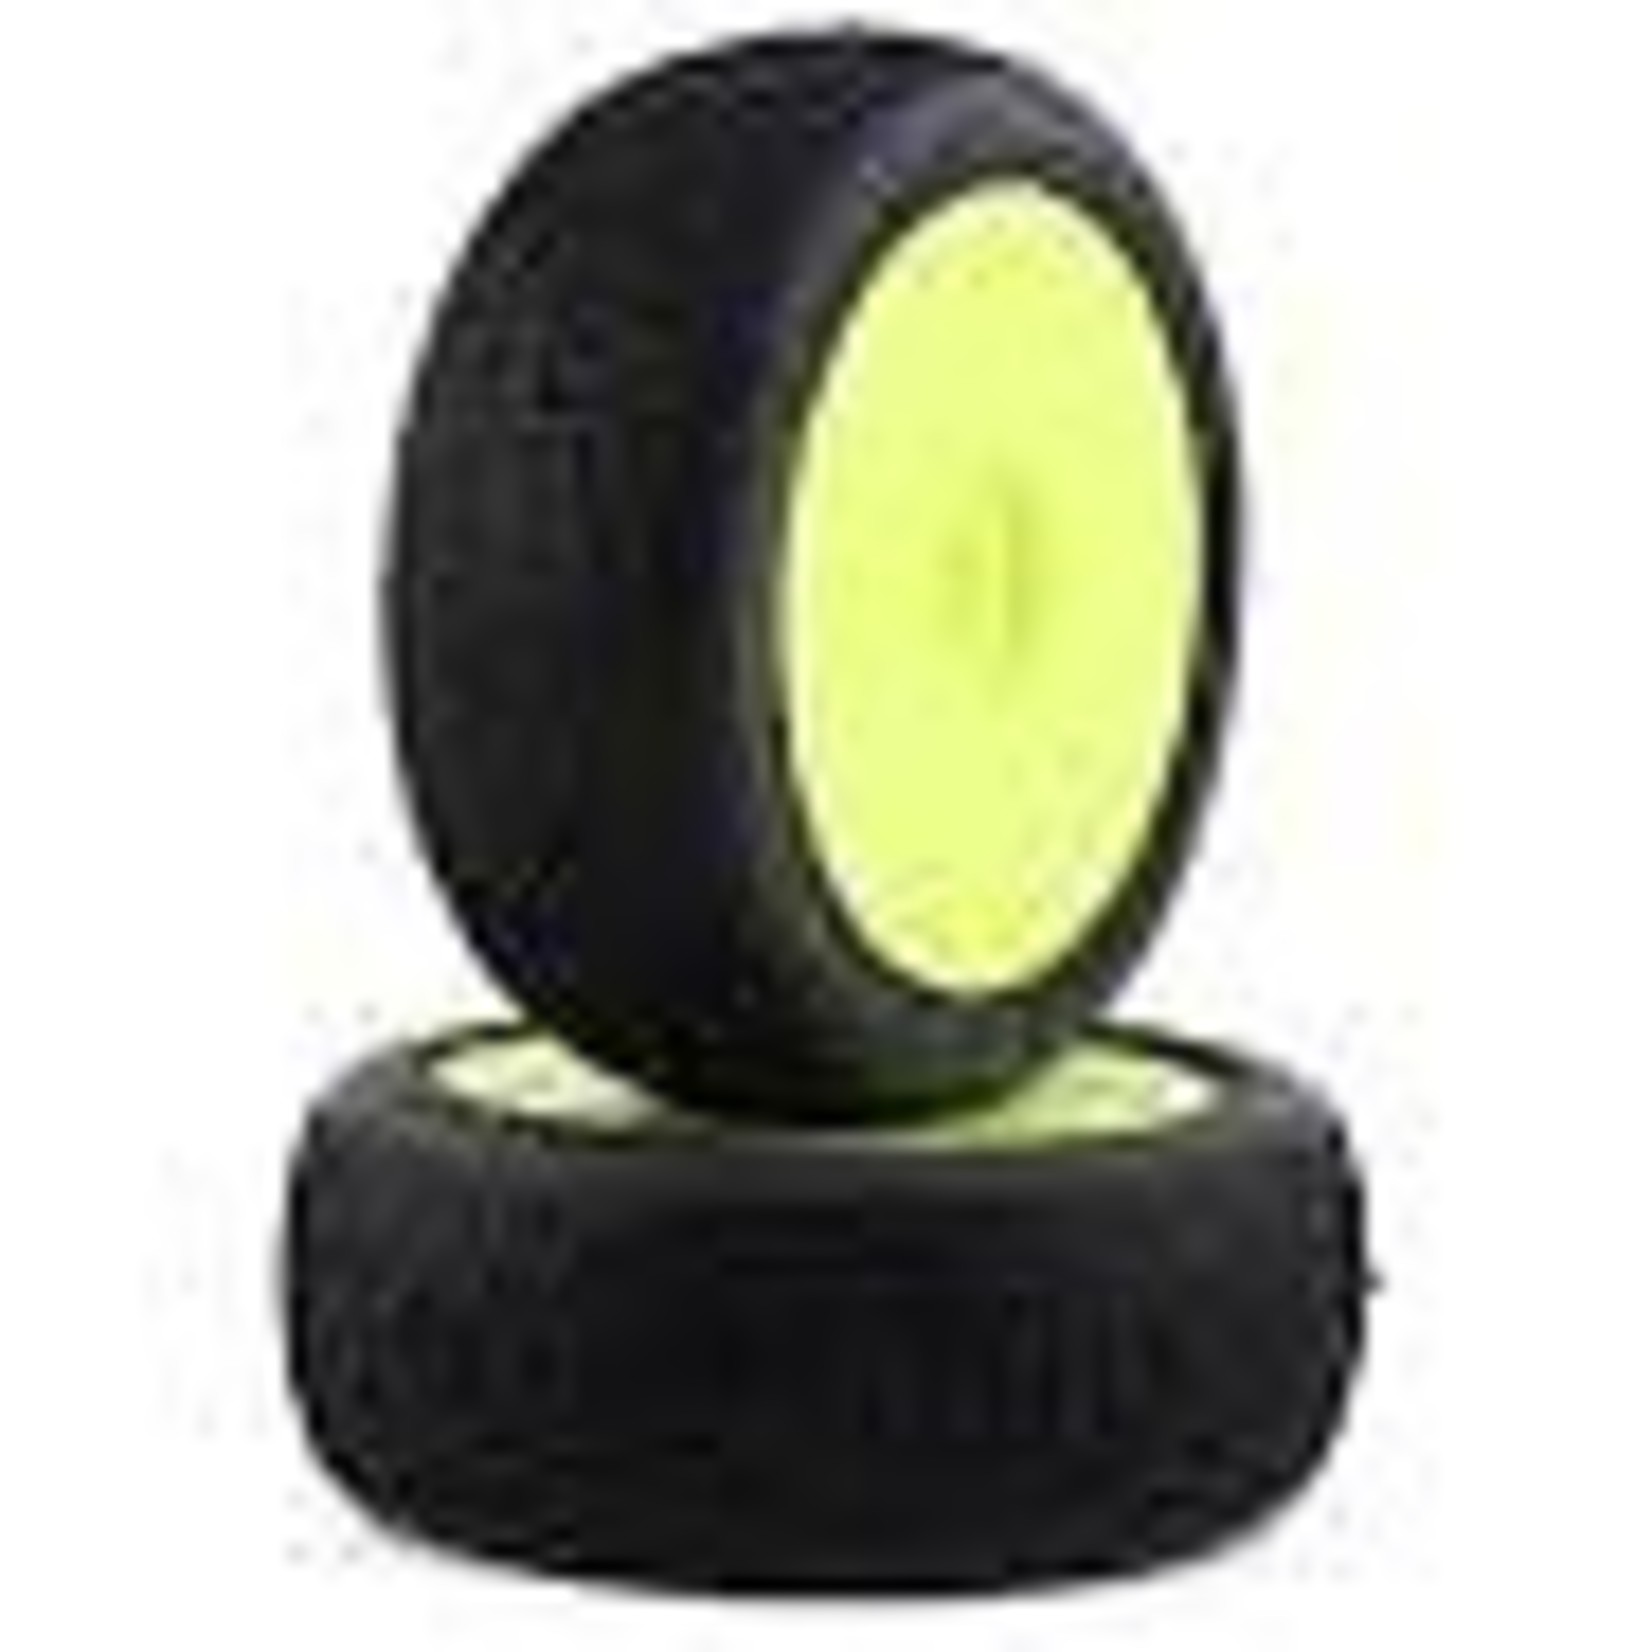 GRP GRPGBY09A  GRP Tires Sonic Pre-Mounted 1/8 Buggy Tires (2) (Yellow) (Soft)